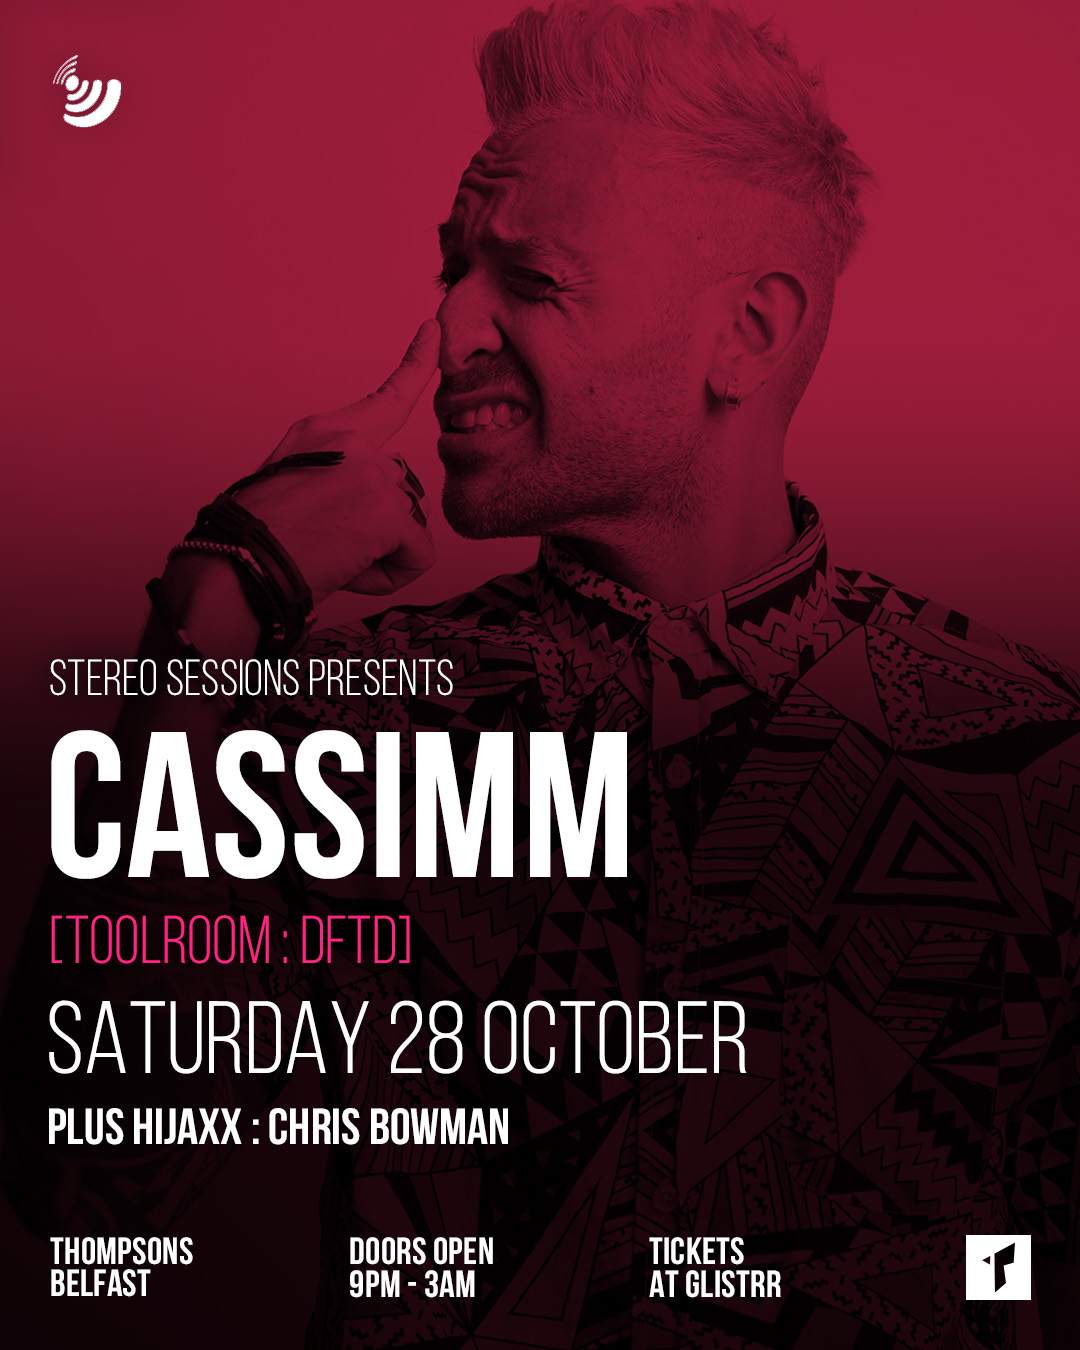 STEREO SESSIONS pres. CASSIMM (Toolroom: Ministry Of Sound) - Página trasera